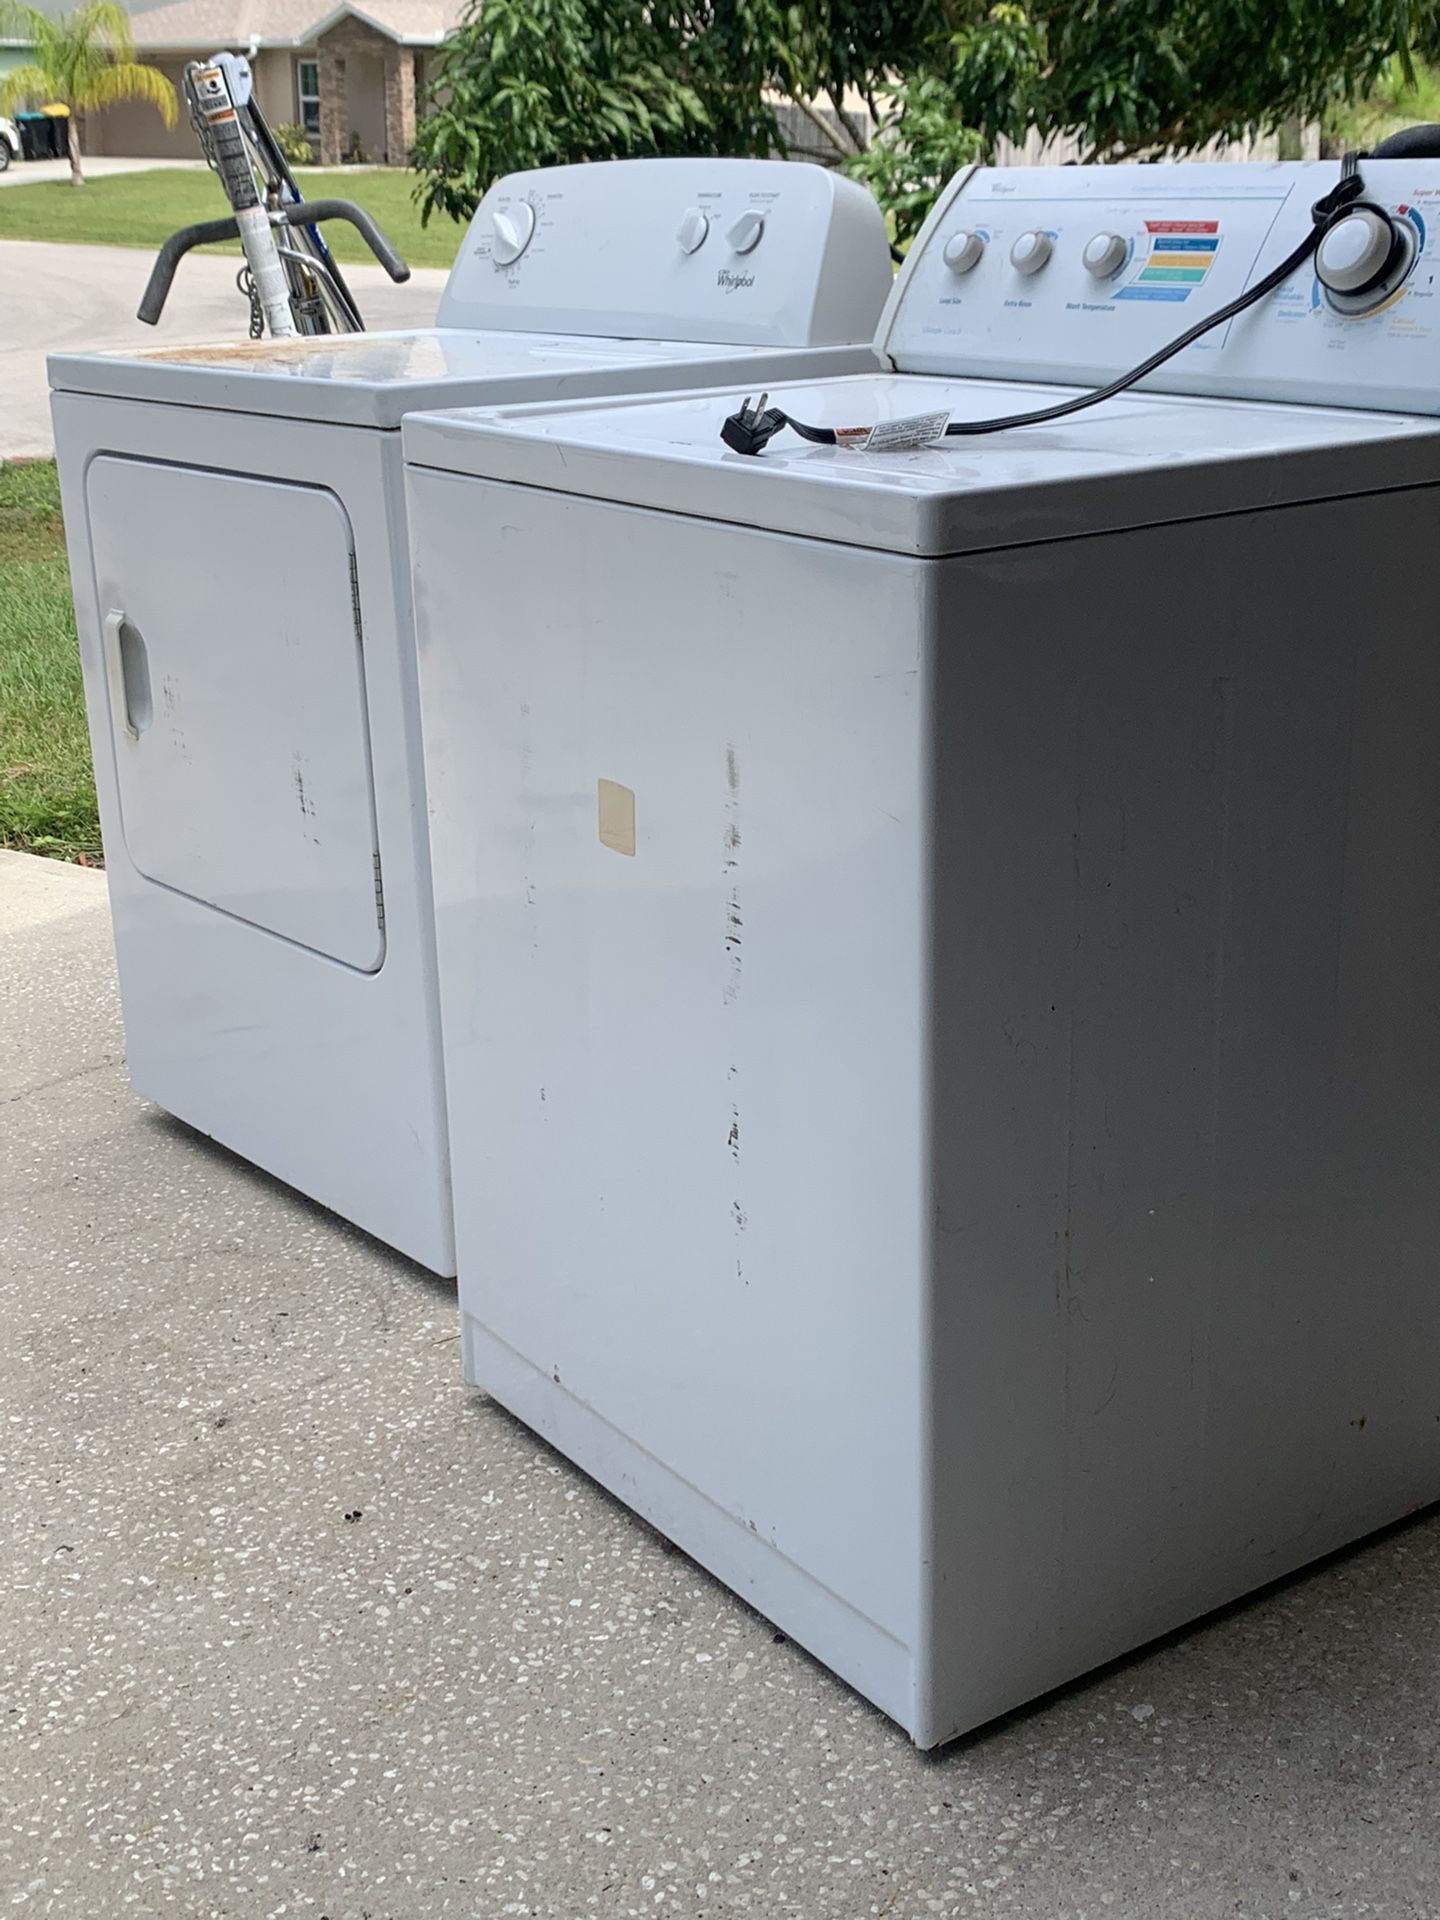 Washer And Dryer.  Good Condition.